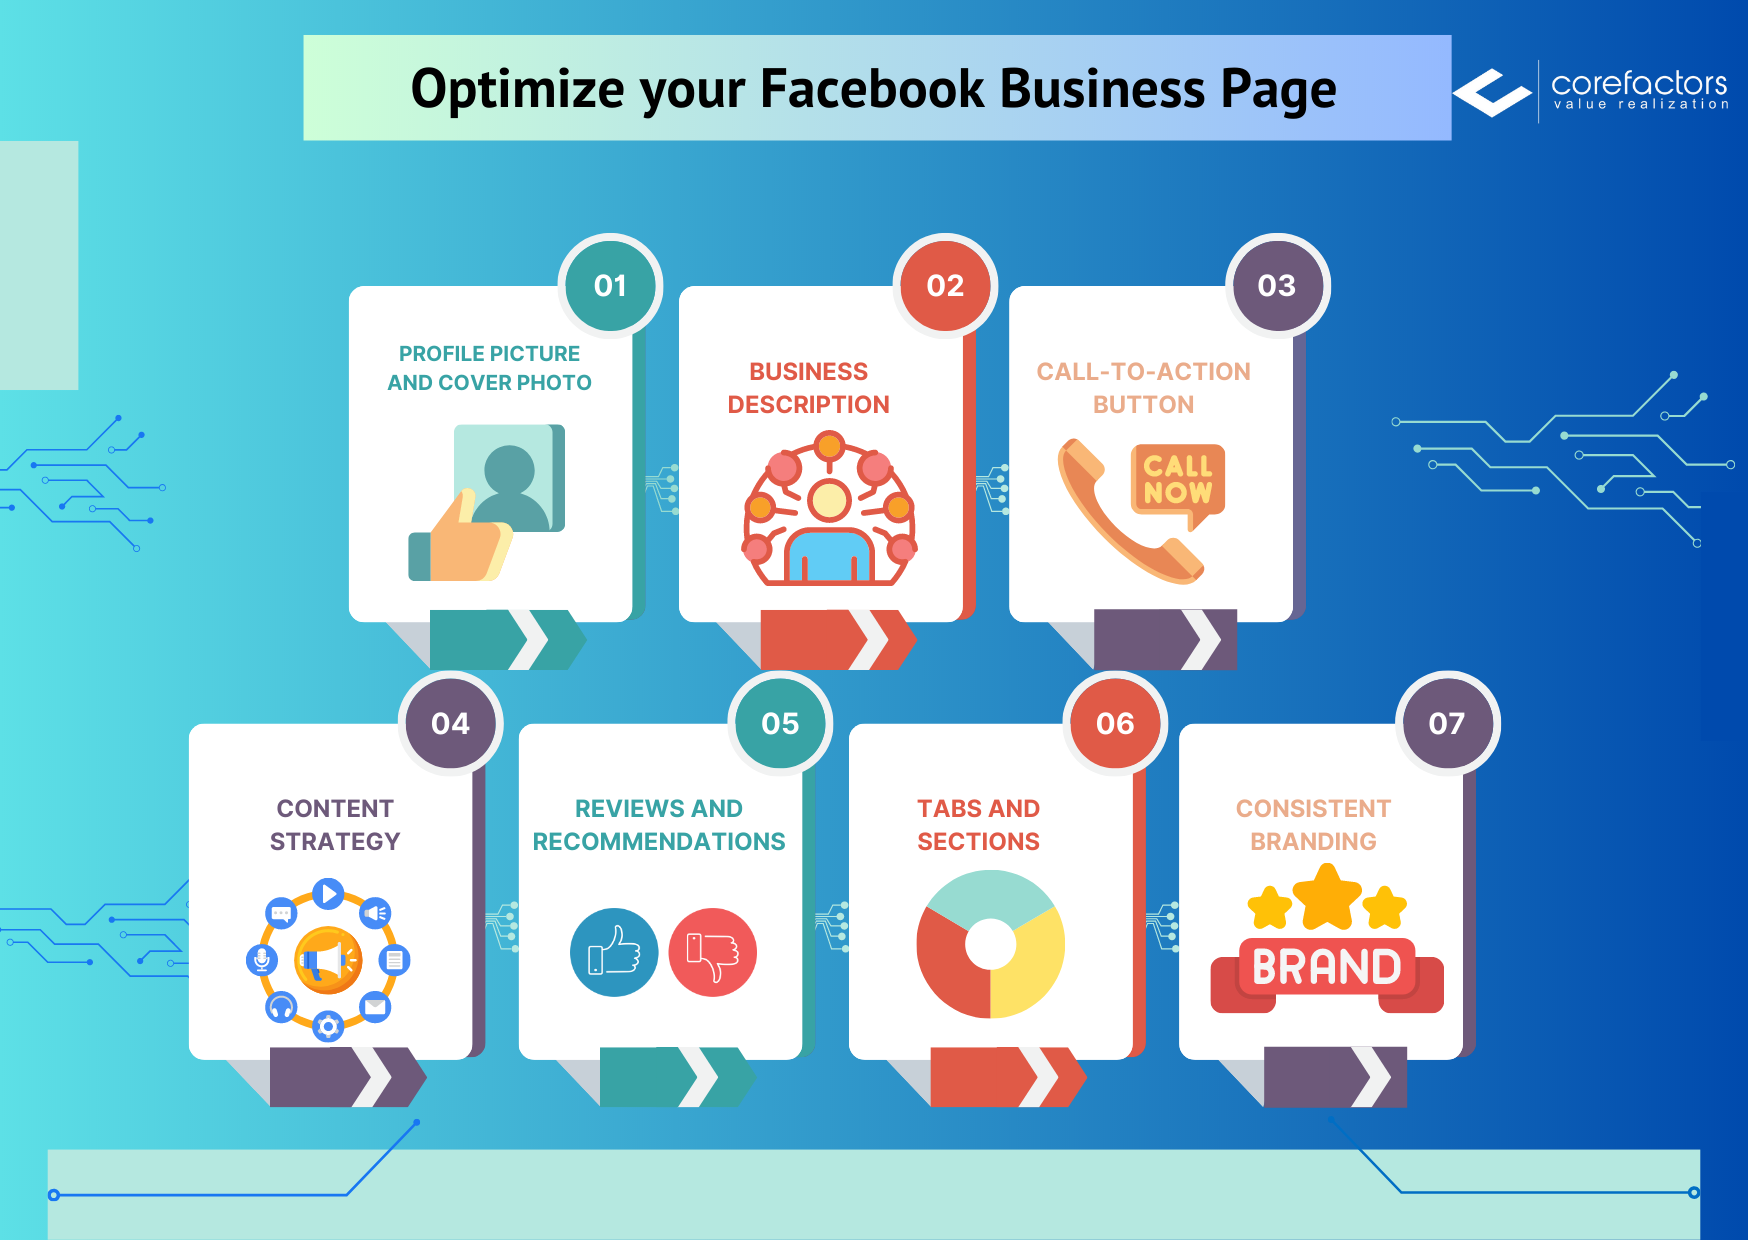 Optimize your Facebook Business Page with these 7 steps